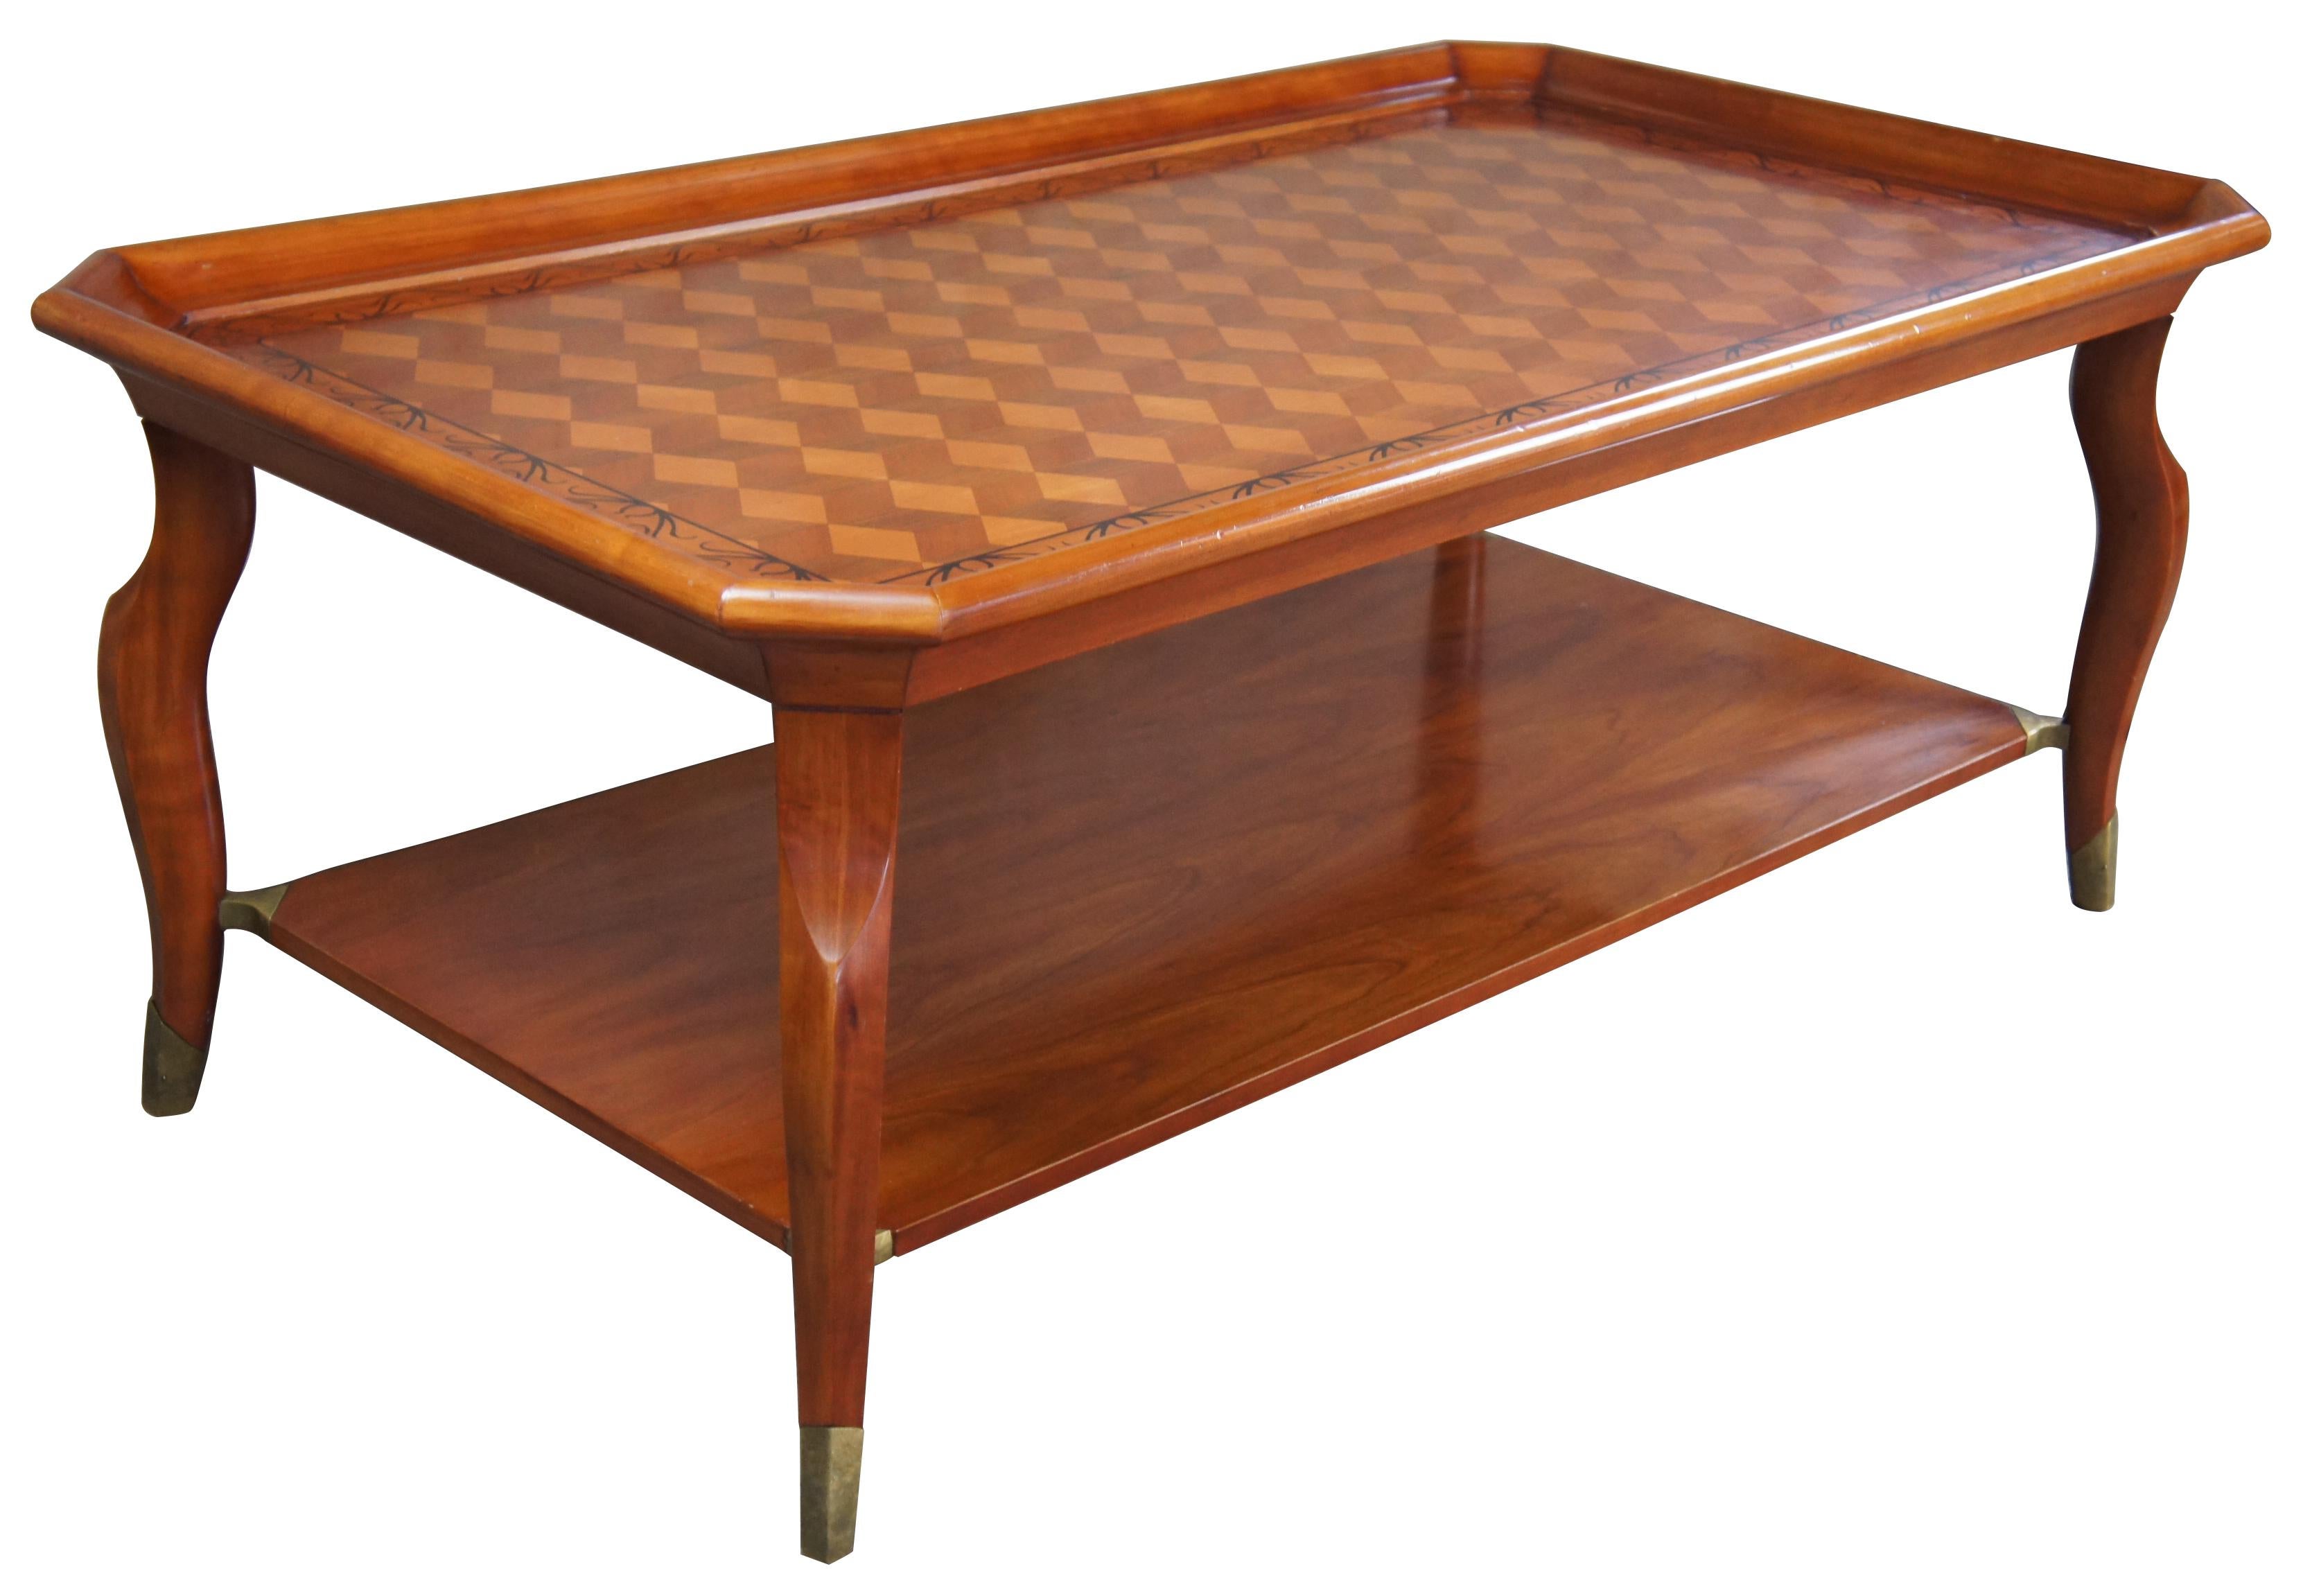 French Provincial John Widdicomb Marquetry Inlaid Coffee Cocktail Table French Inspired Cherry